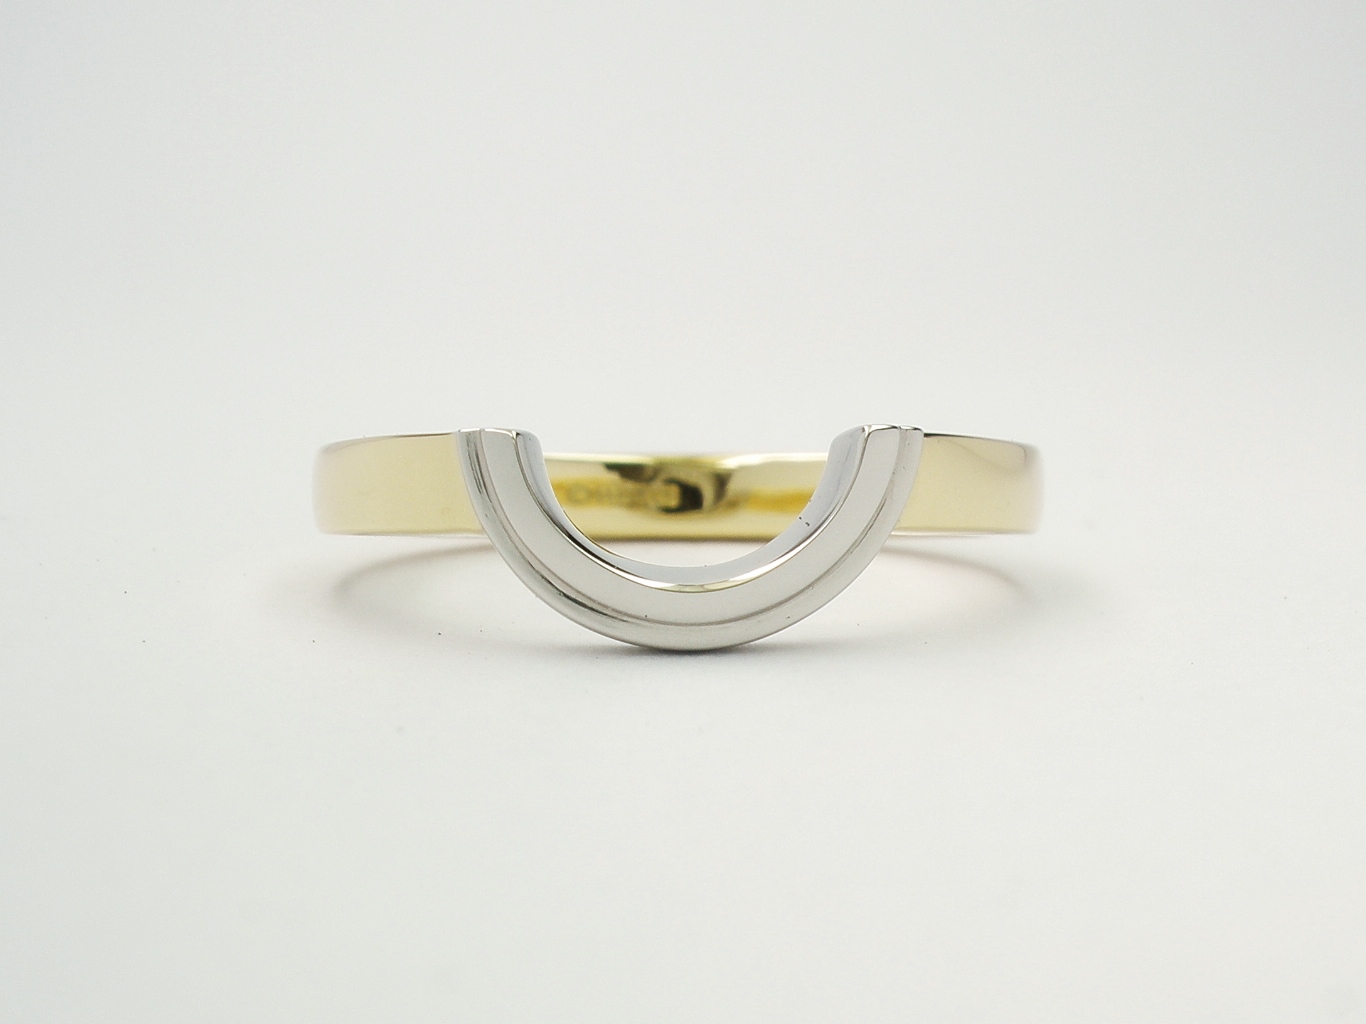 'Arc' shaped wedding ring created in 18ct. yellow gold and platinum to fit around a round diamond cluster engagement ring.